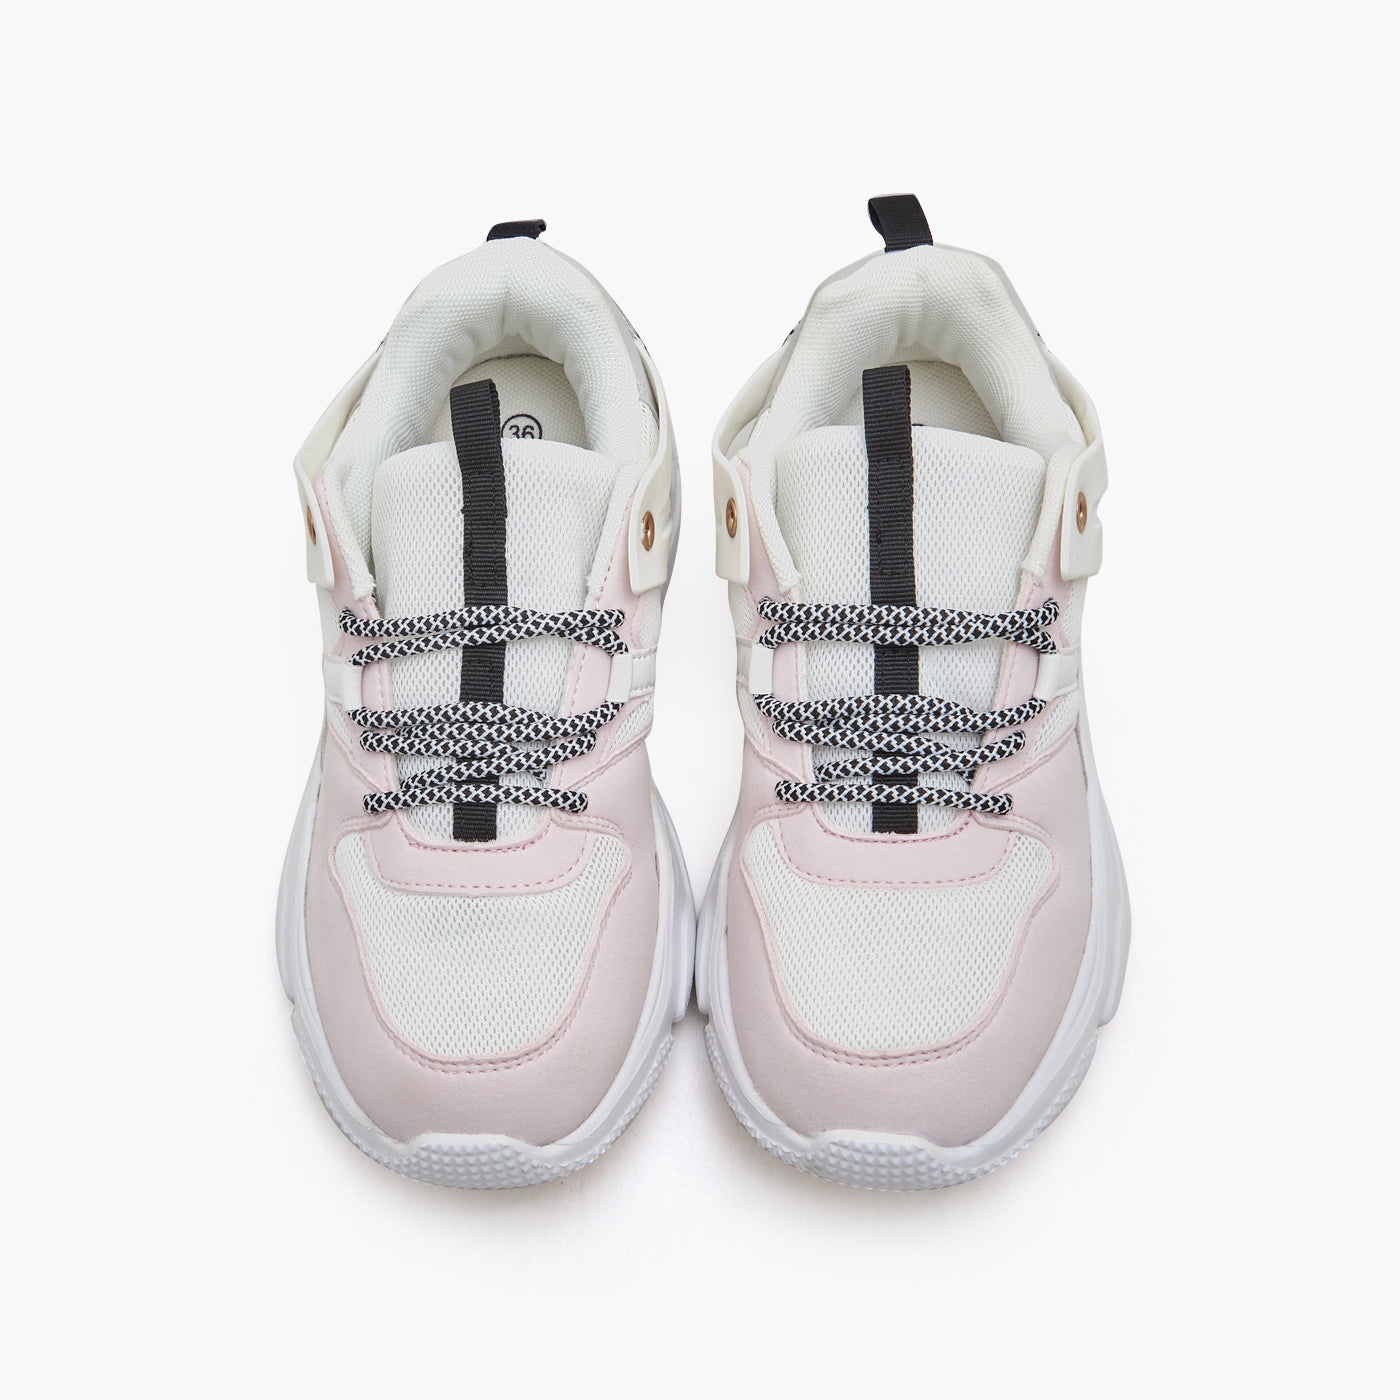 Pair of white and pink leather low SNEAKERS, notched rub…